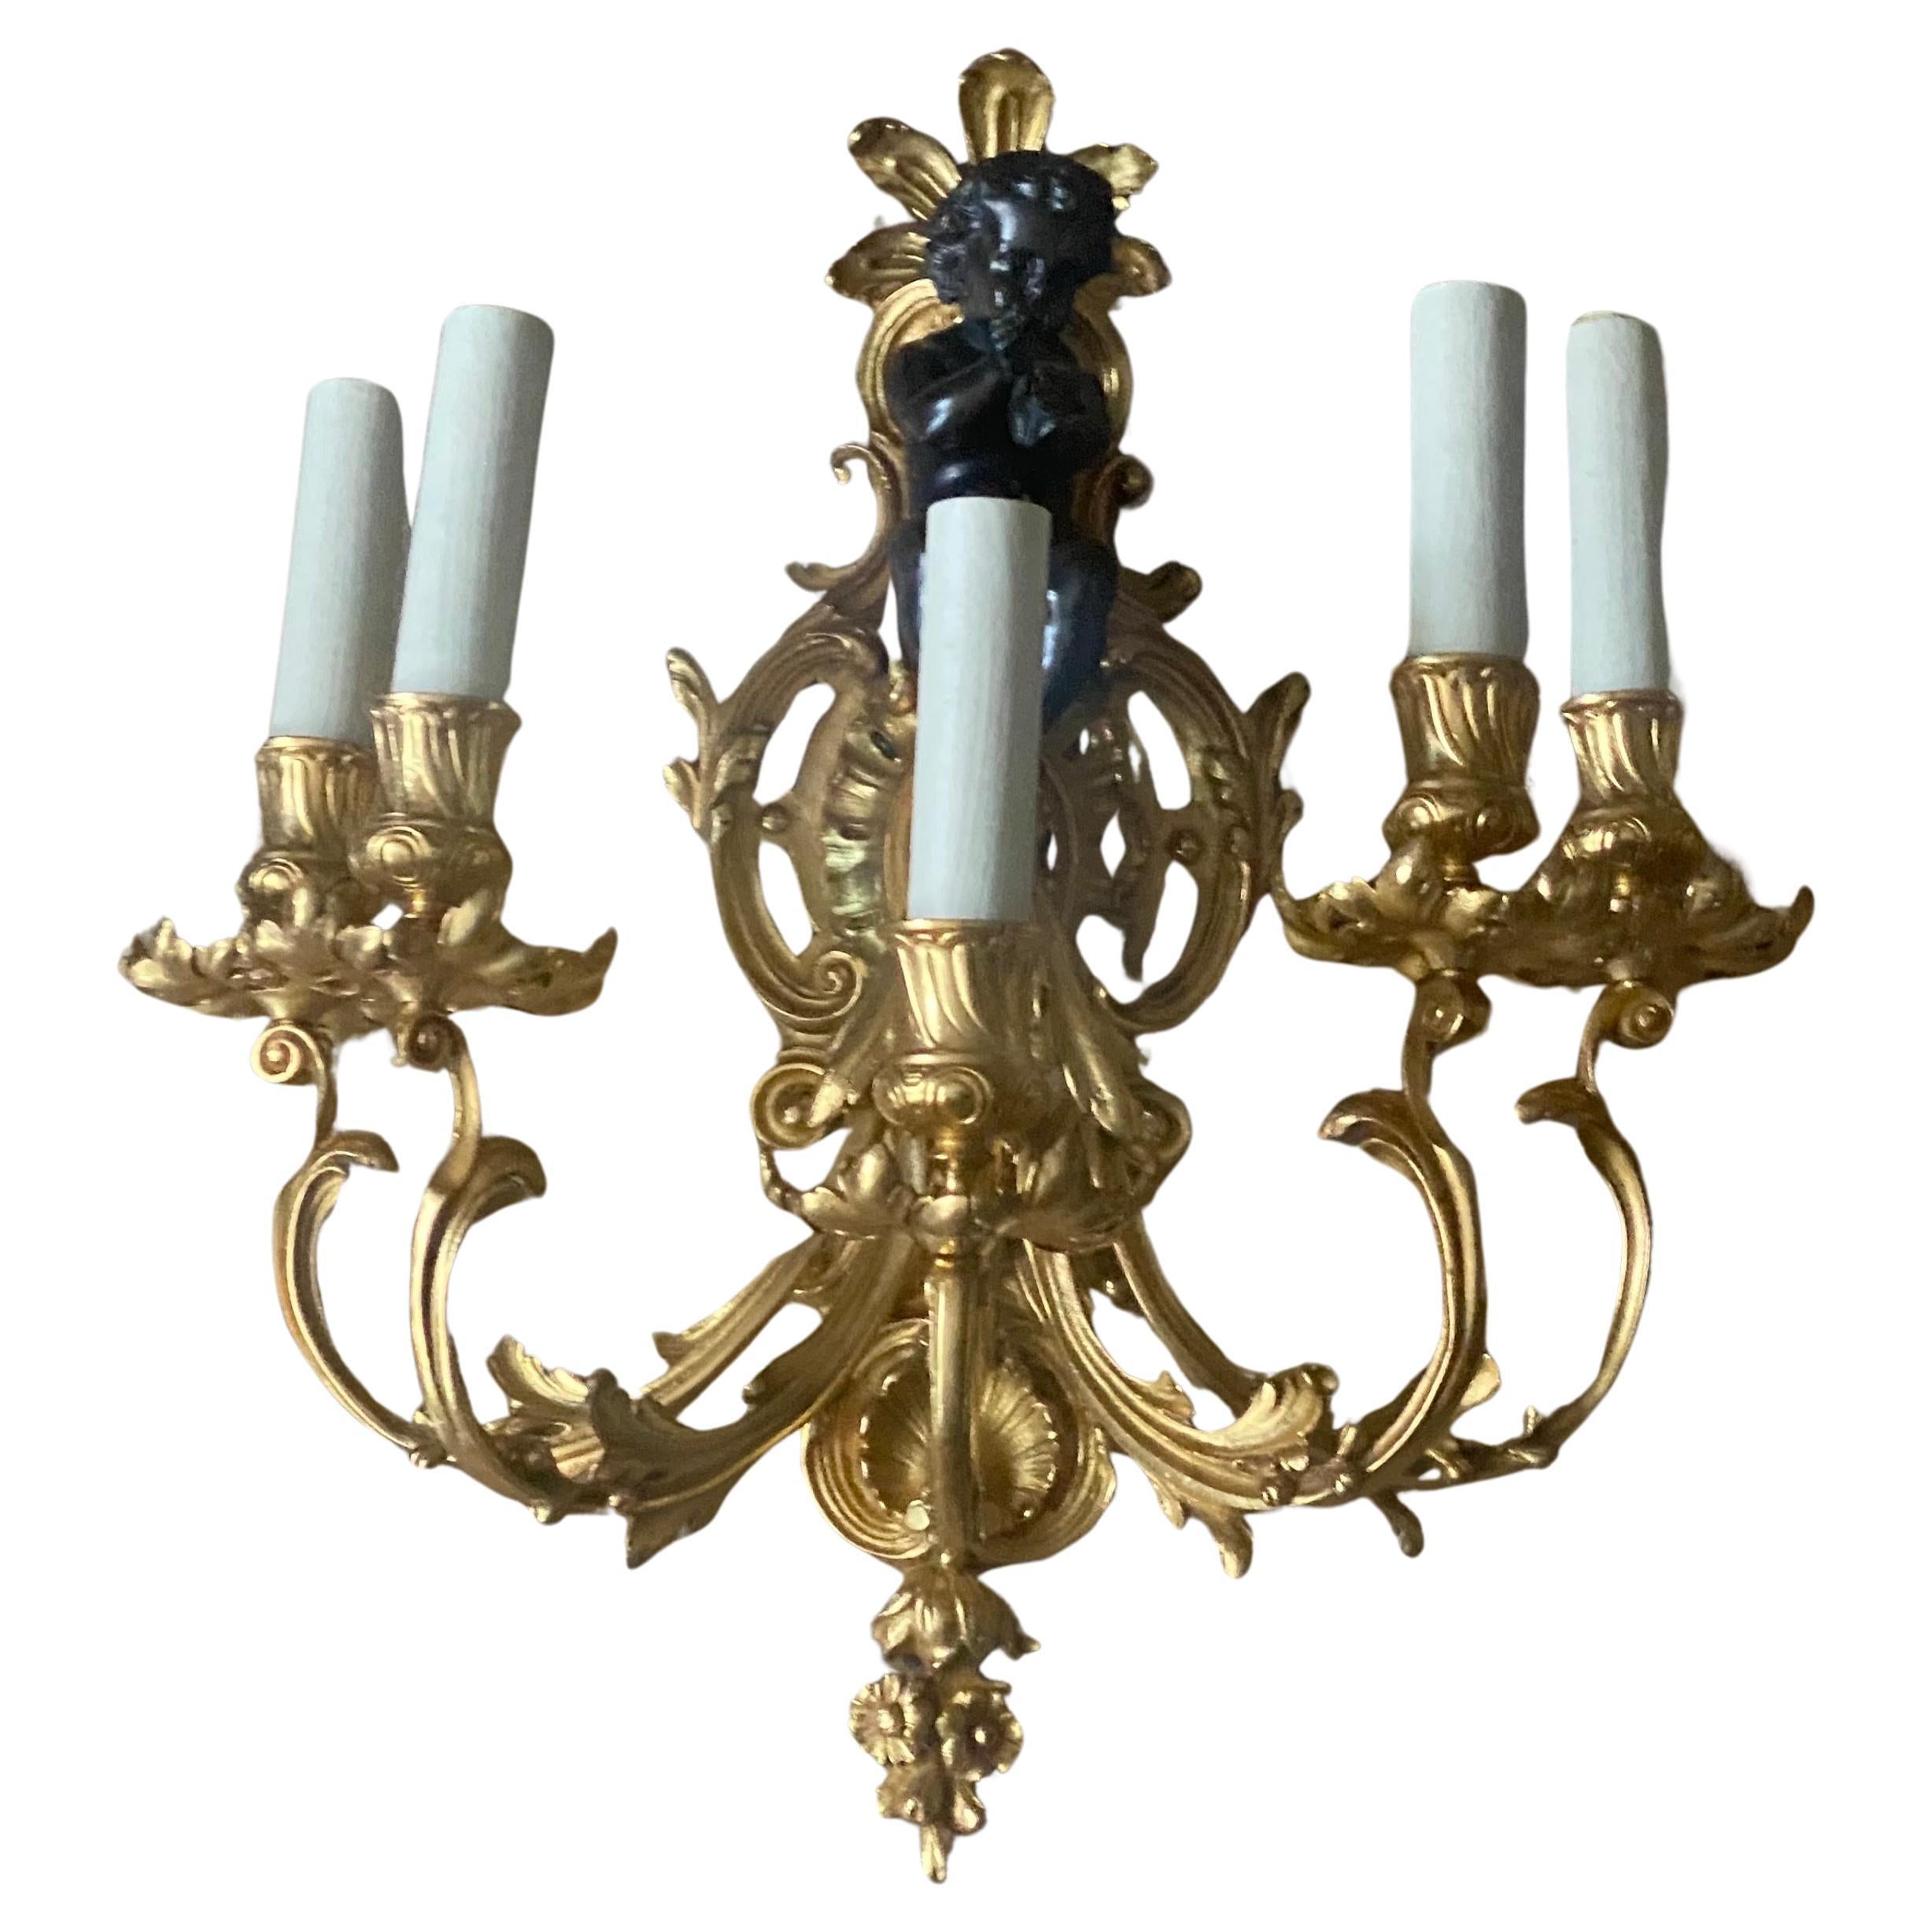 A Large Pair of 19th Century French Gilt Bronze Dore Cherub Wall Sconces For Sale 4